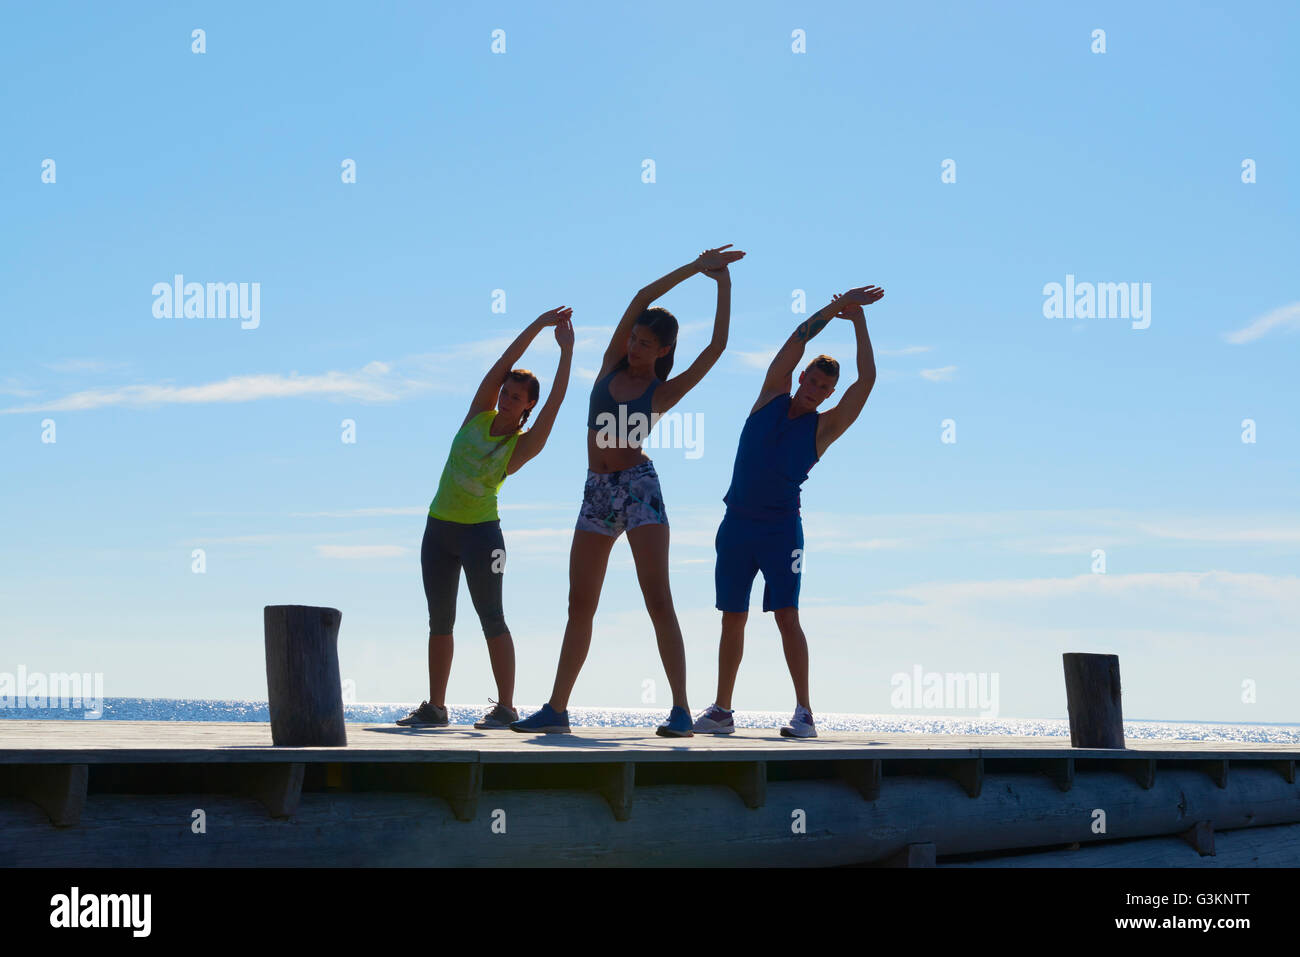 Friends on pier wearing exercise clothes arms raised, bending over sideways stretching Stock Photo